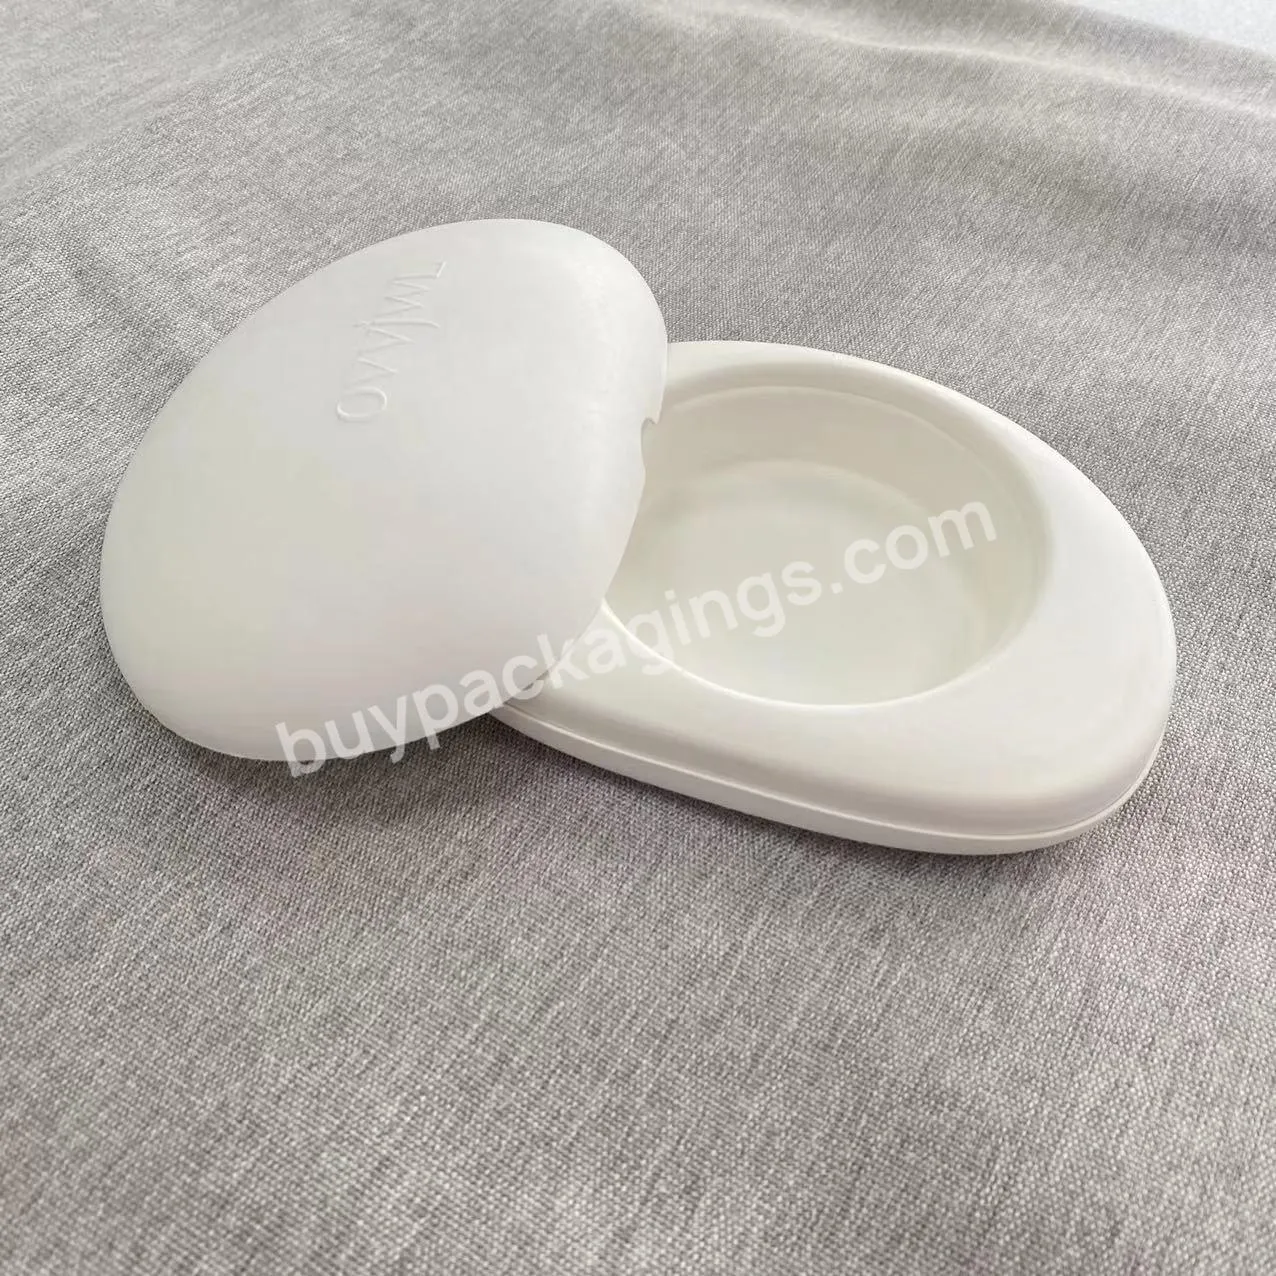 Cosmetic Sugarcane Bagasse Eco Friendly Innovative Designs Paper Pulp Molded Moulding Skin Care Personal Care Packaging - Buy Eco Friendly Skin Care Packaging,Cosmetic Personal Care Packaging,Bagasse Paper Pulp Molded Moulding Packaging.